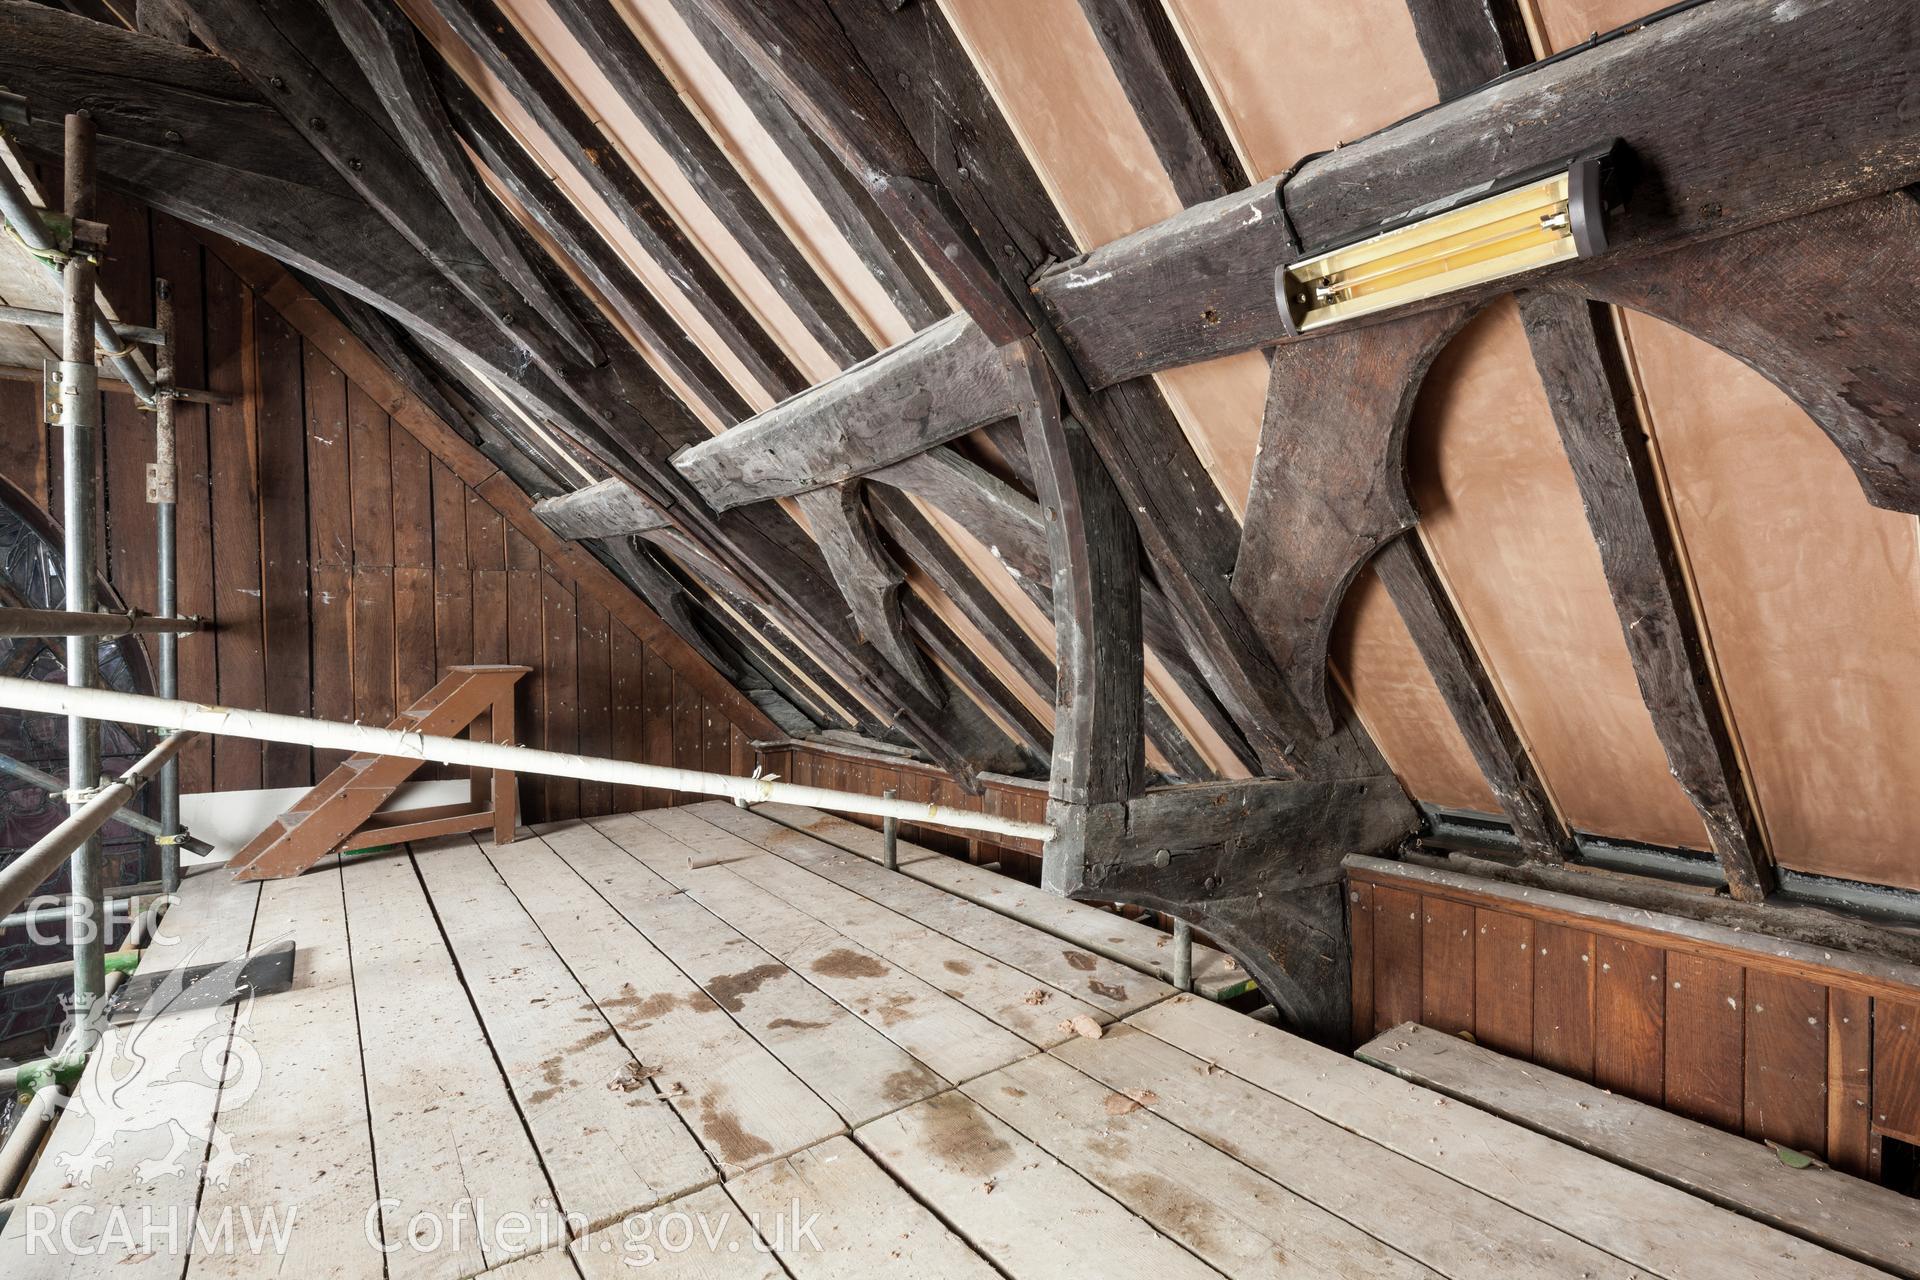 Roof frame, showing cut tie-beam with steel bar replacement